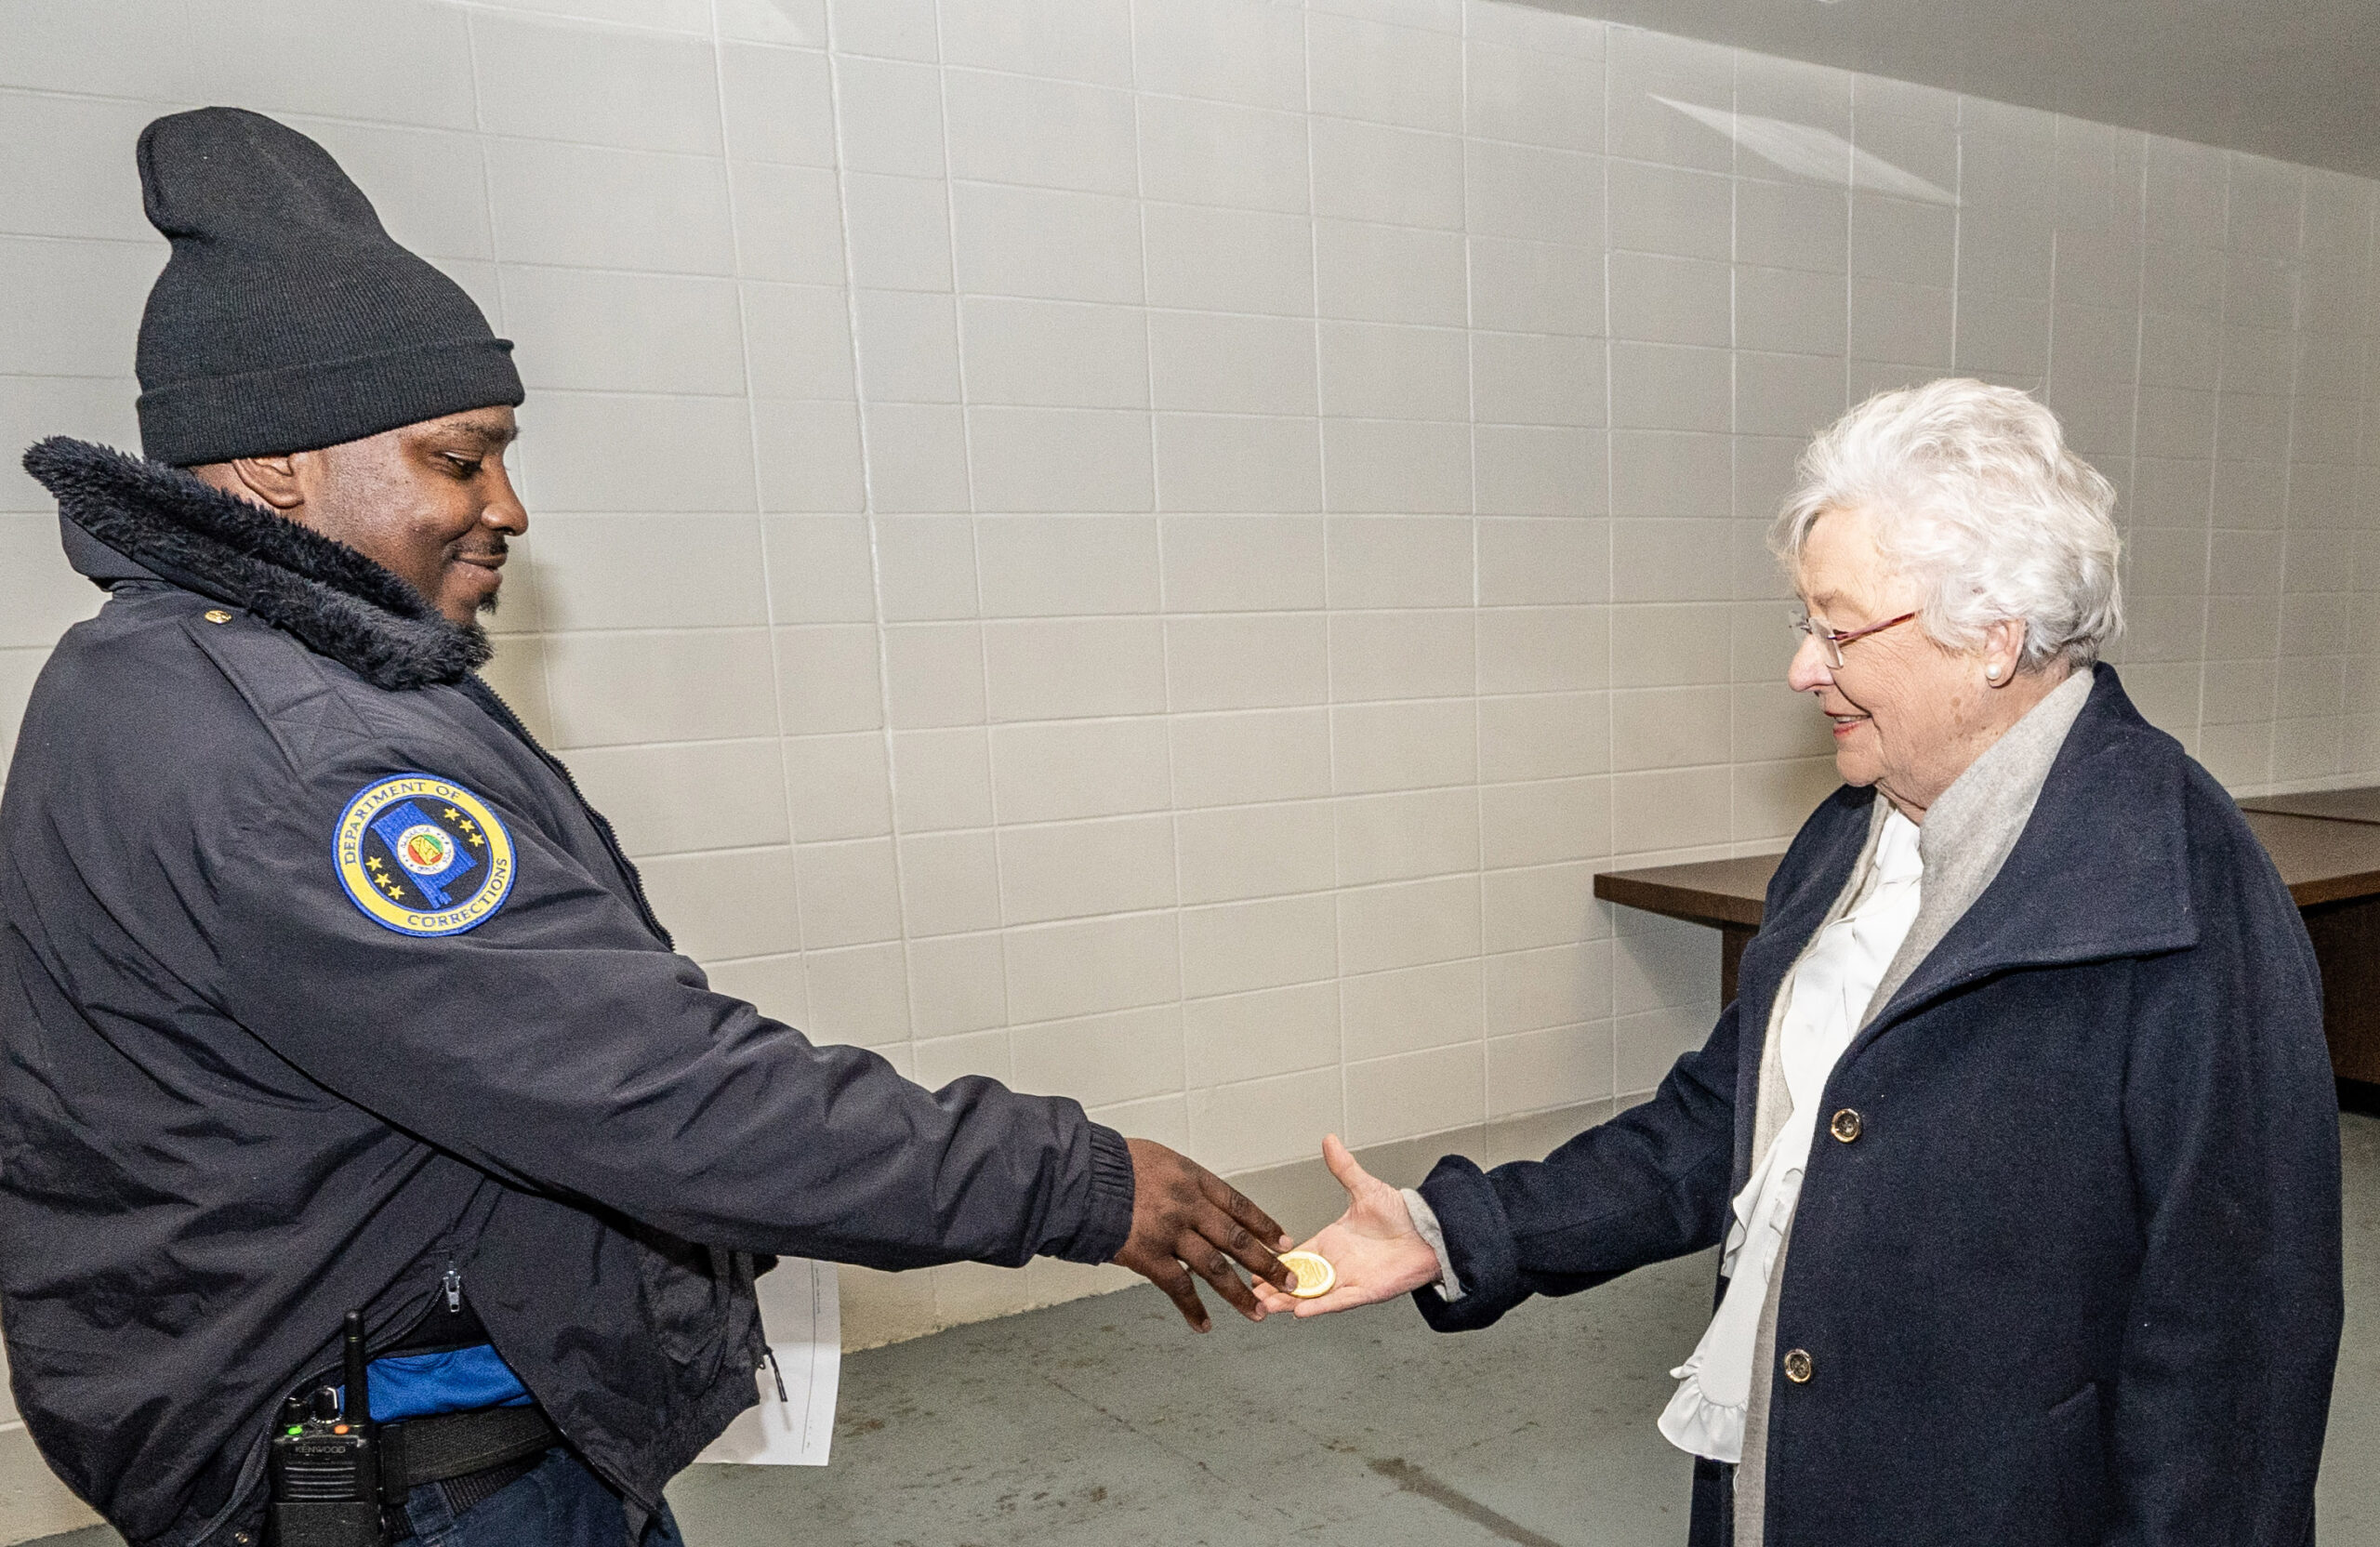 Governor Ivey Shows Gratitude for Corrections Officers, Makes Surprise Visit to Two Facilities